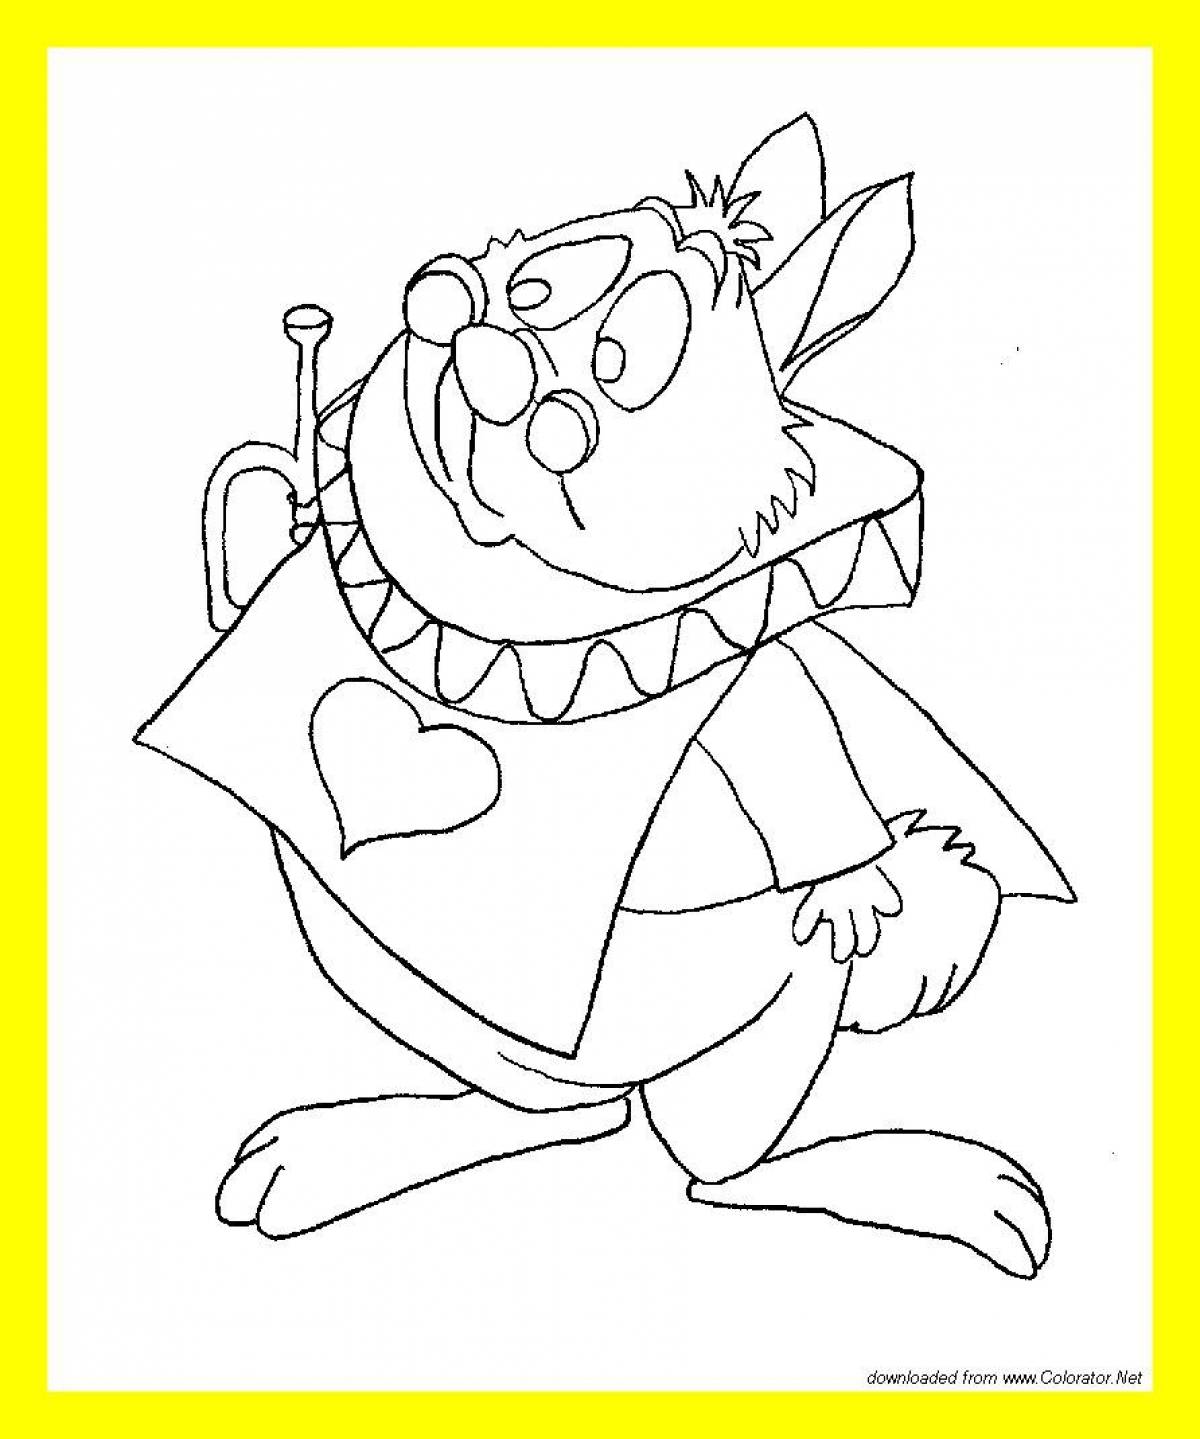 Alice's sparkling coloring page